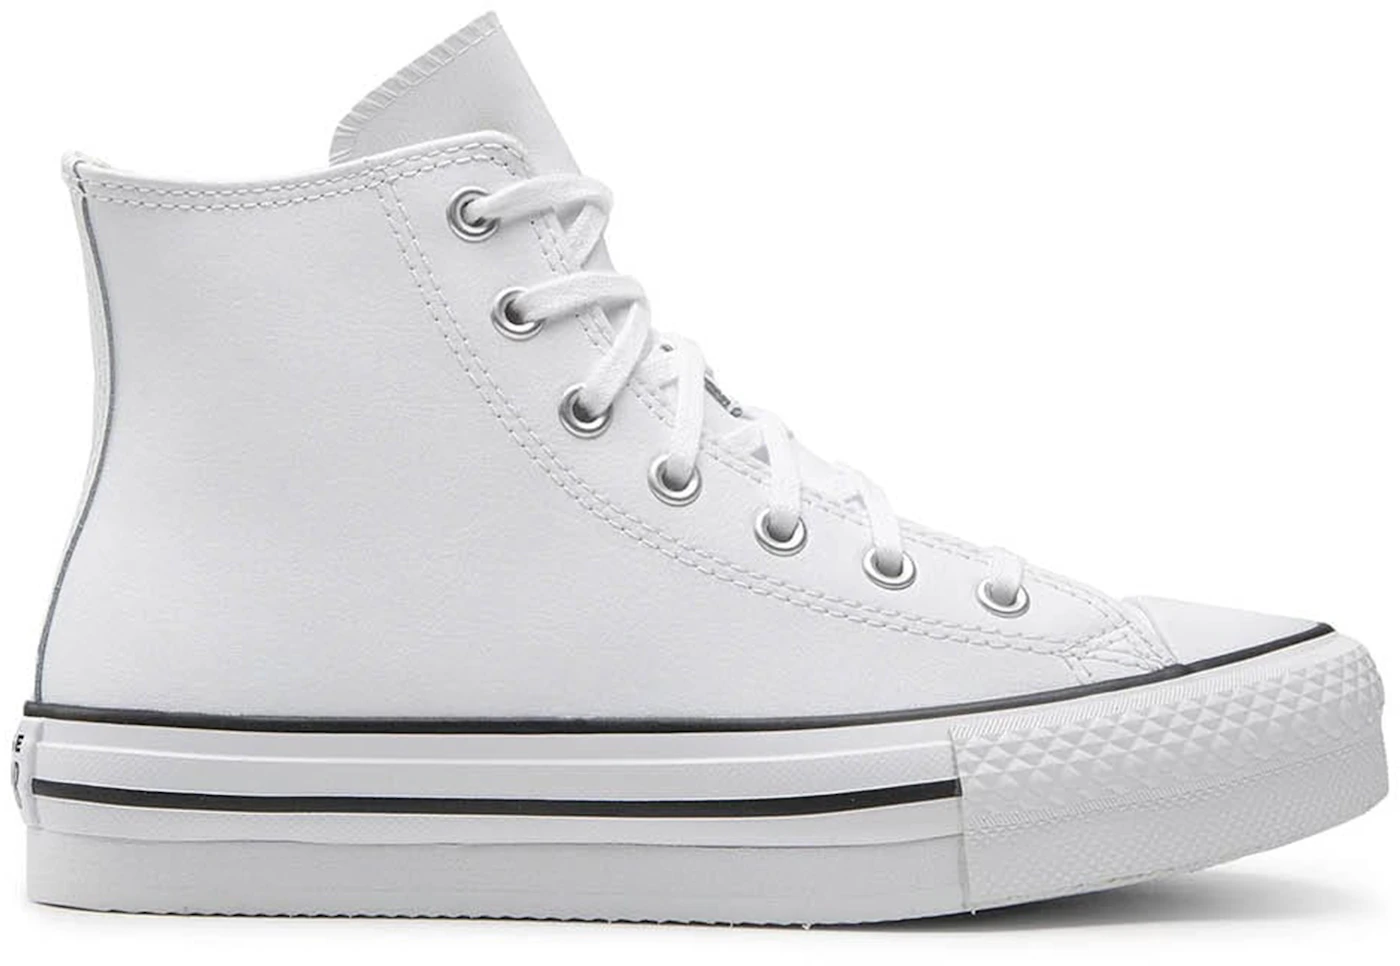 Converse Chuck Taylor All Star Eva Lift Hi Leather White Natural Ivory ...